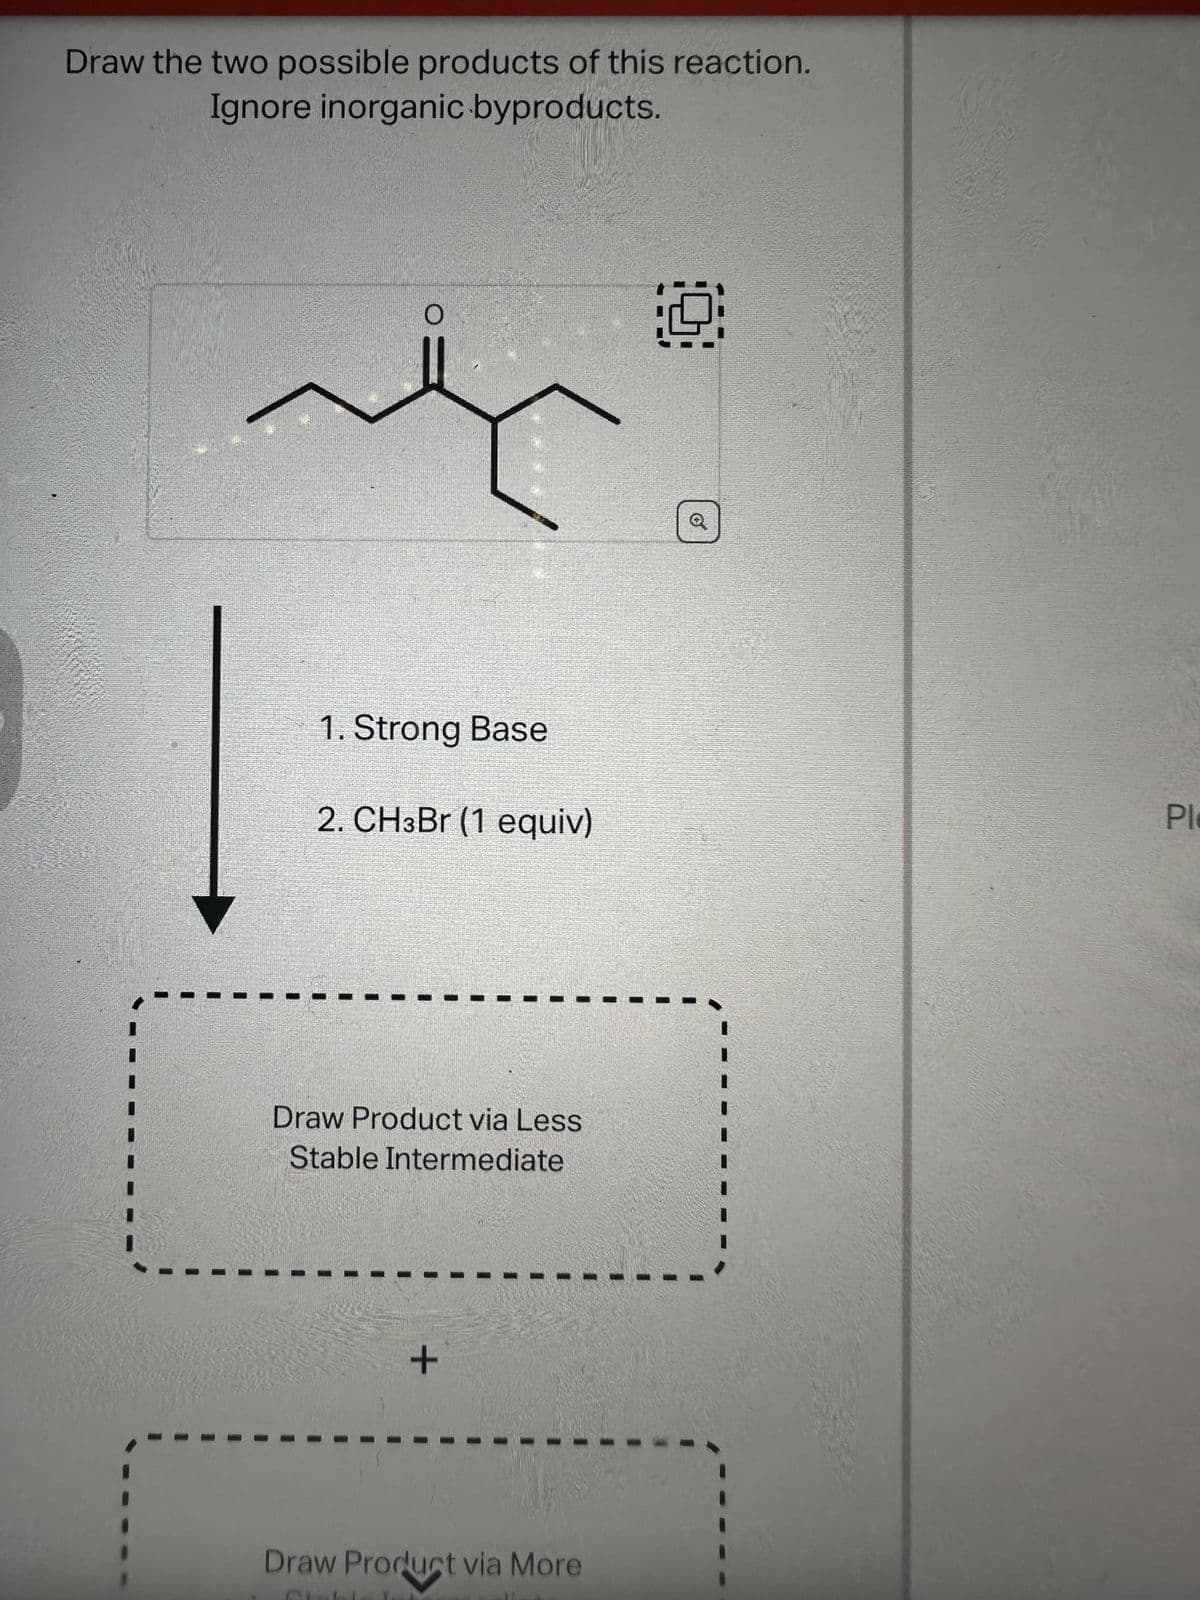 Draw the two possible products of this reaction.
Ignore inorganic byproducts.
O
1. Strong Base
2. CH3Br (1 equiv)
Draw Product via Less
Stable Intermediate
+
Draw Product via More
Q
Ple